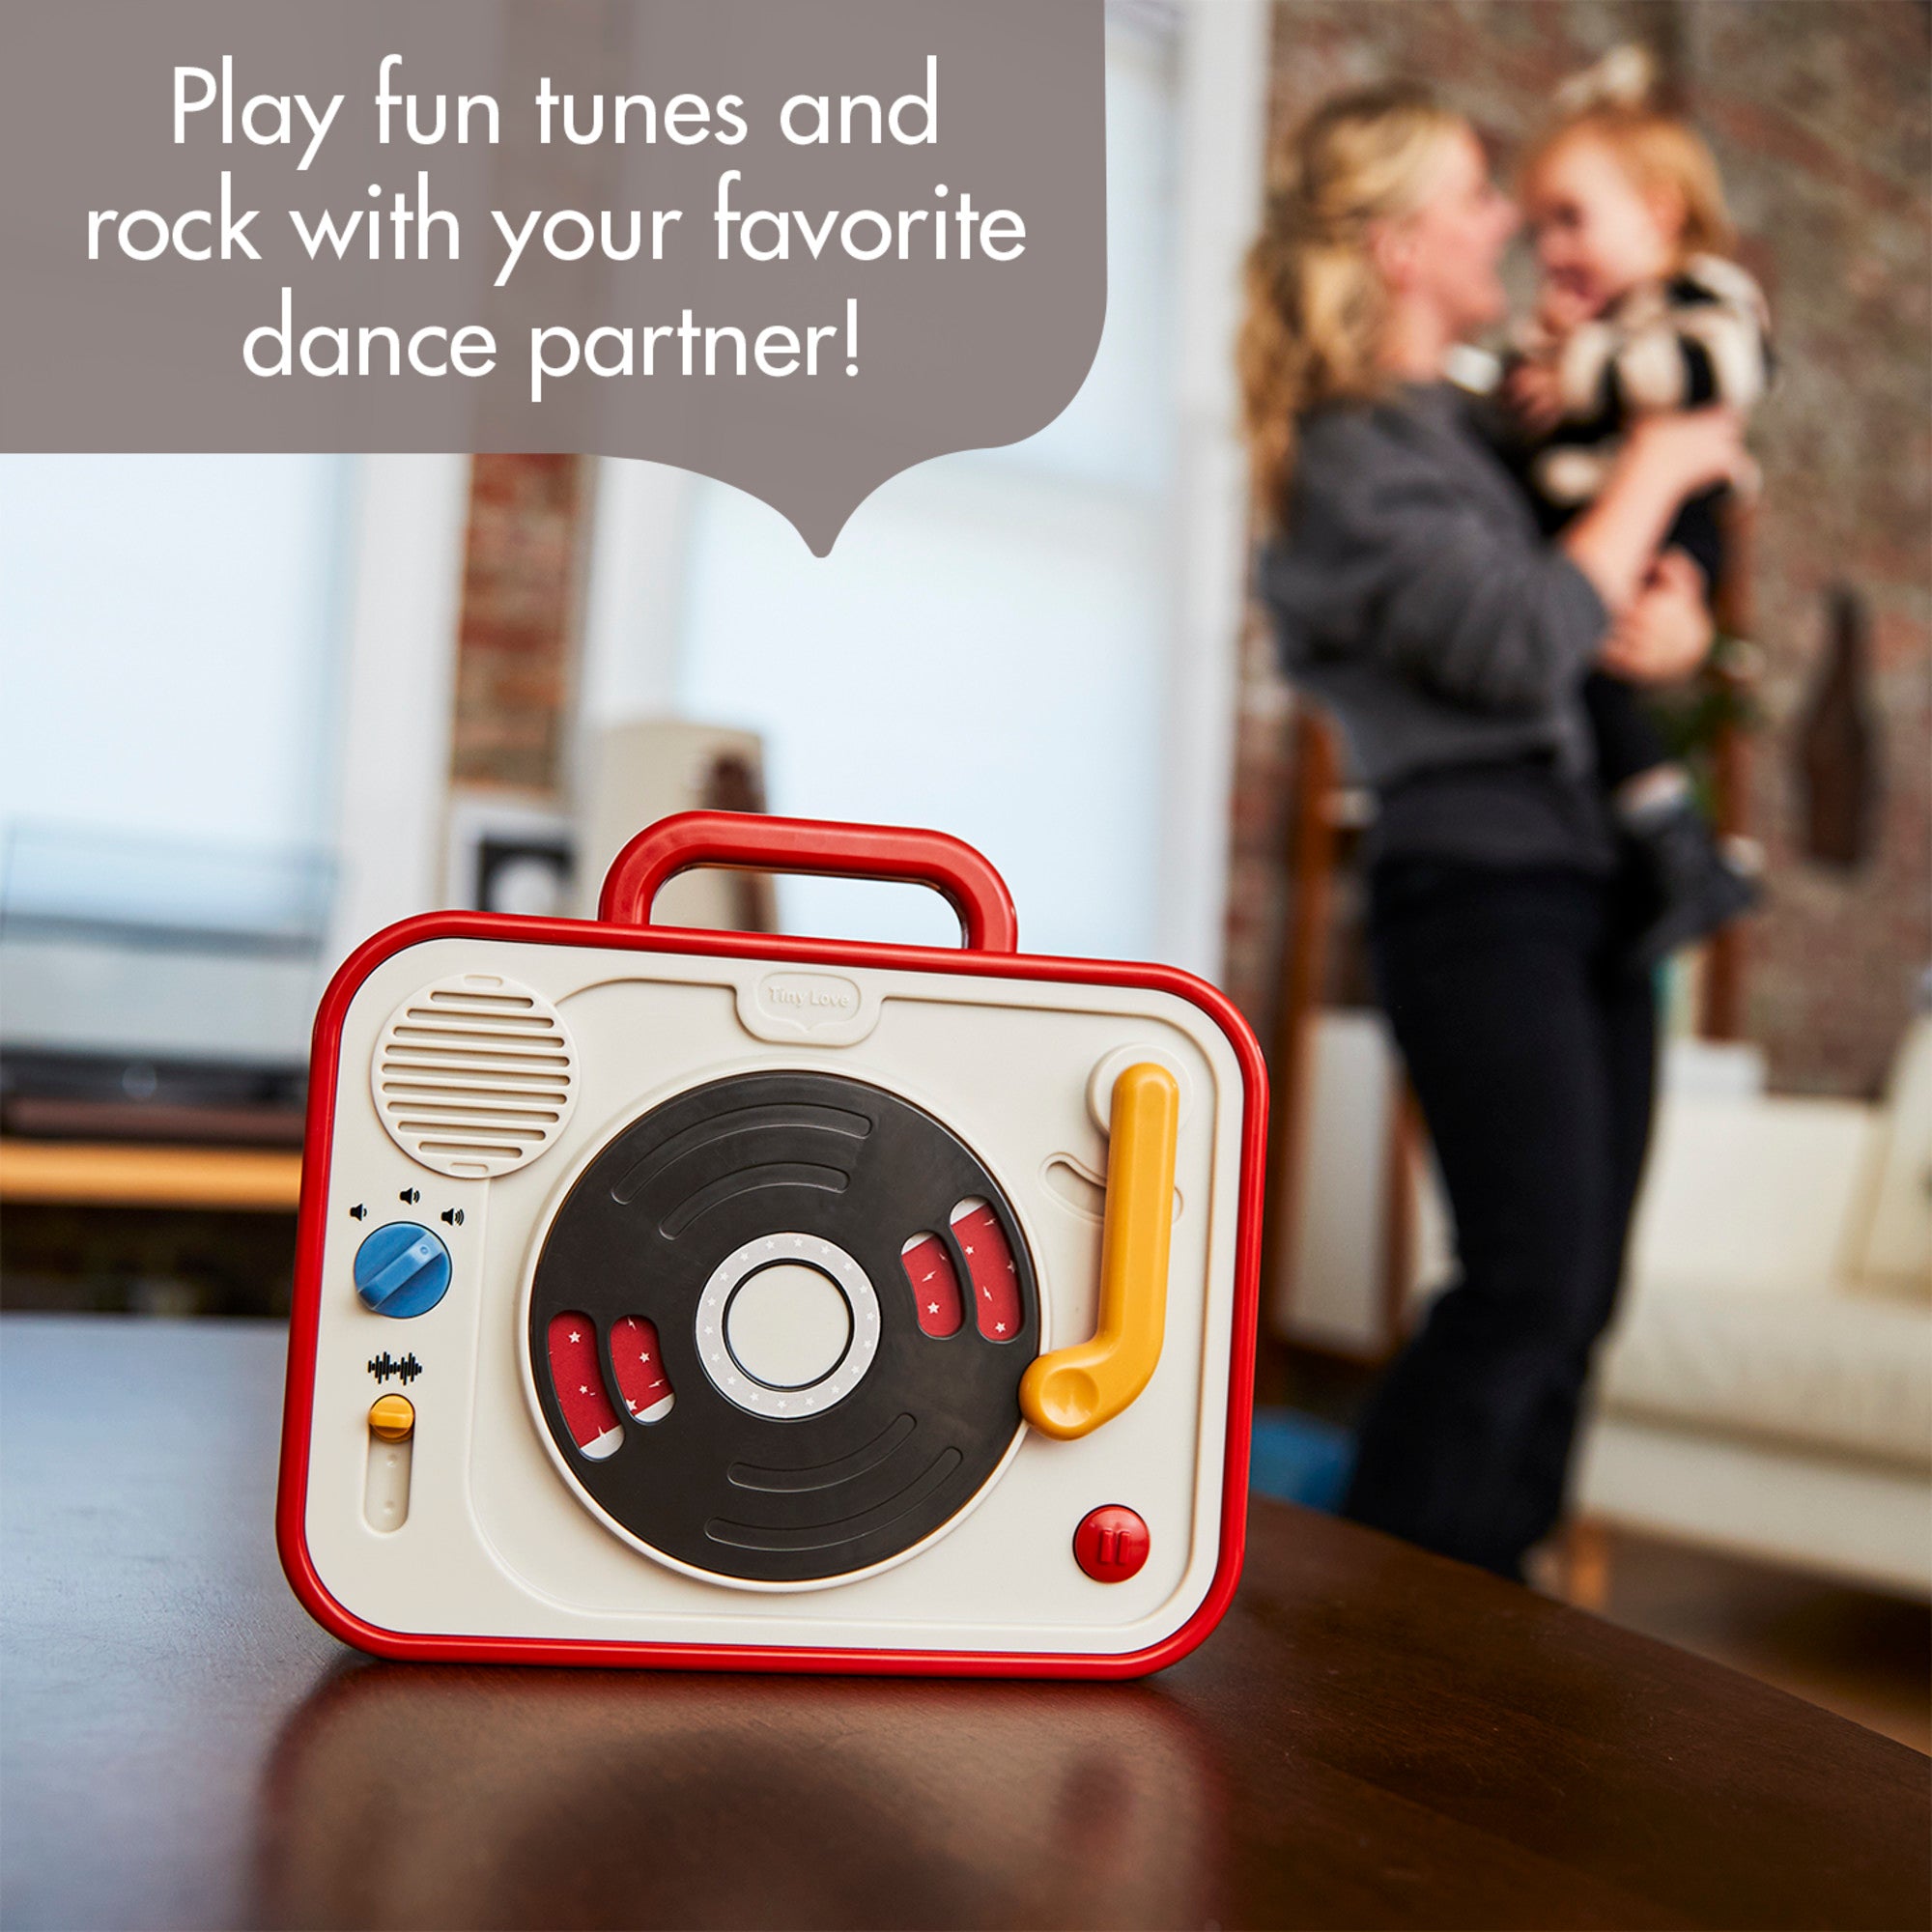 Tiny Rockers DJ Station - Provides the perfect opportunity to rock and bond, creating a fun mix of smiles and shared moments